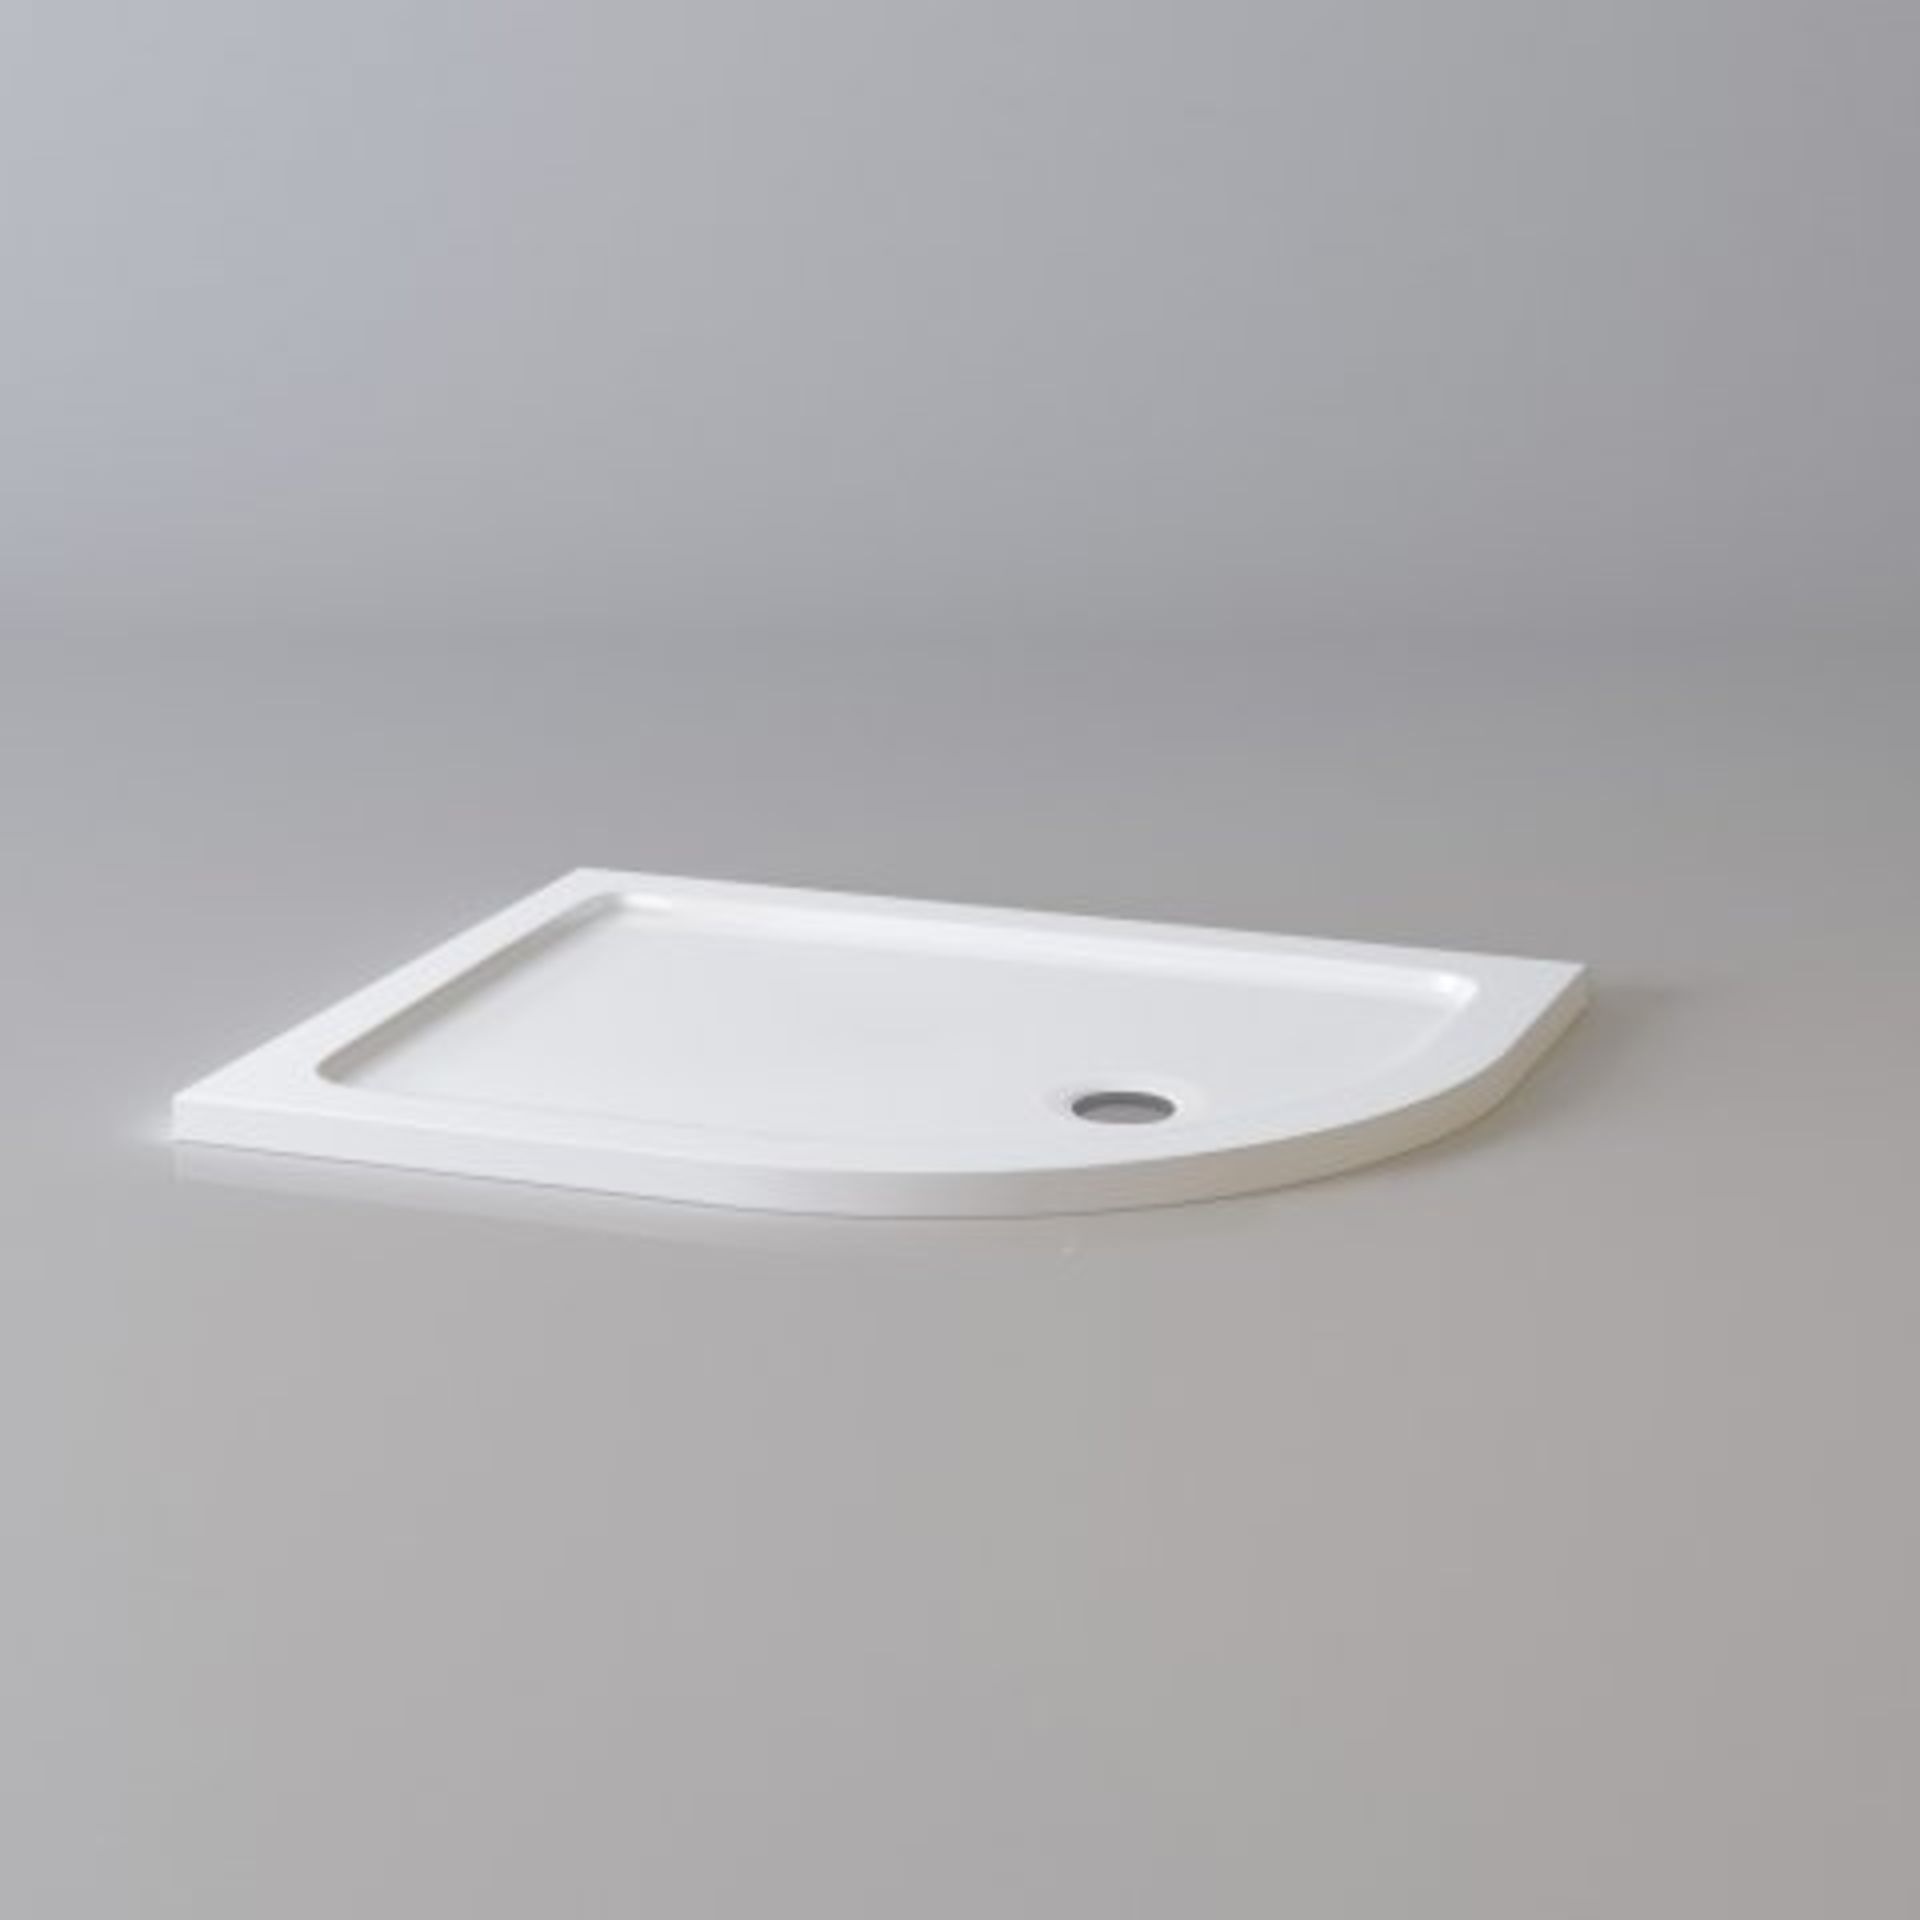 (33) 1000x800mm Offset Quadrant Ultraslim Stone Shower Tray - Right. RRP £249.99. Magnificently